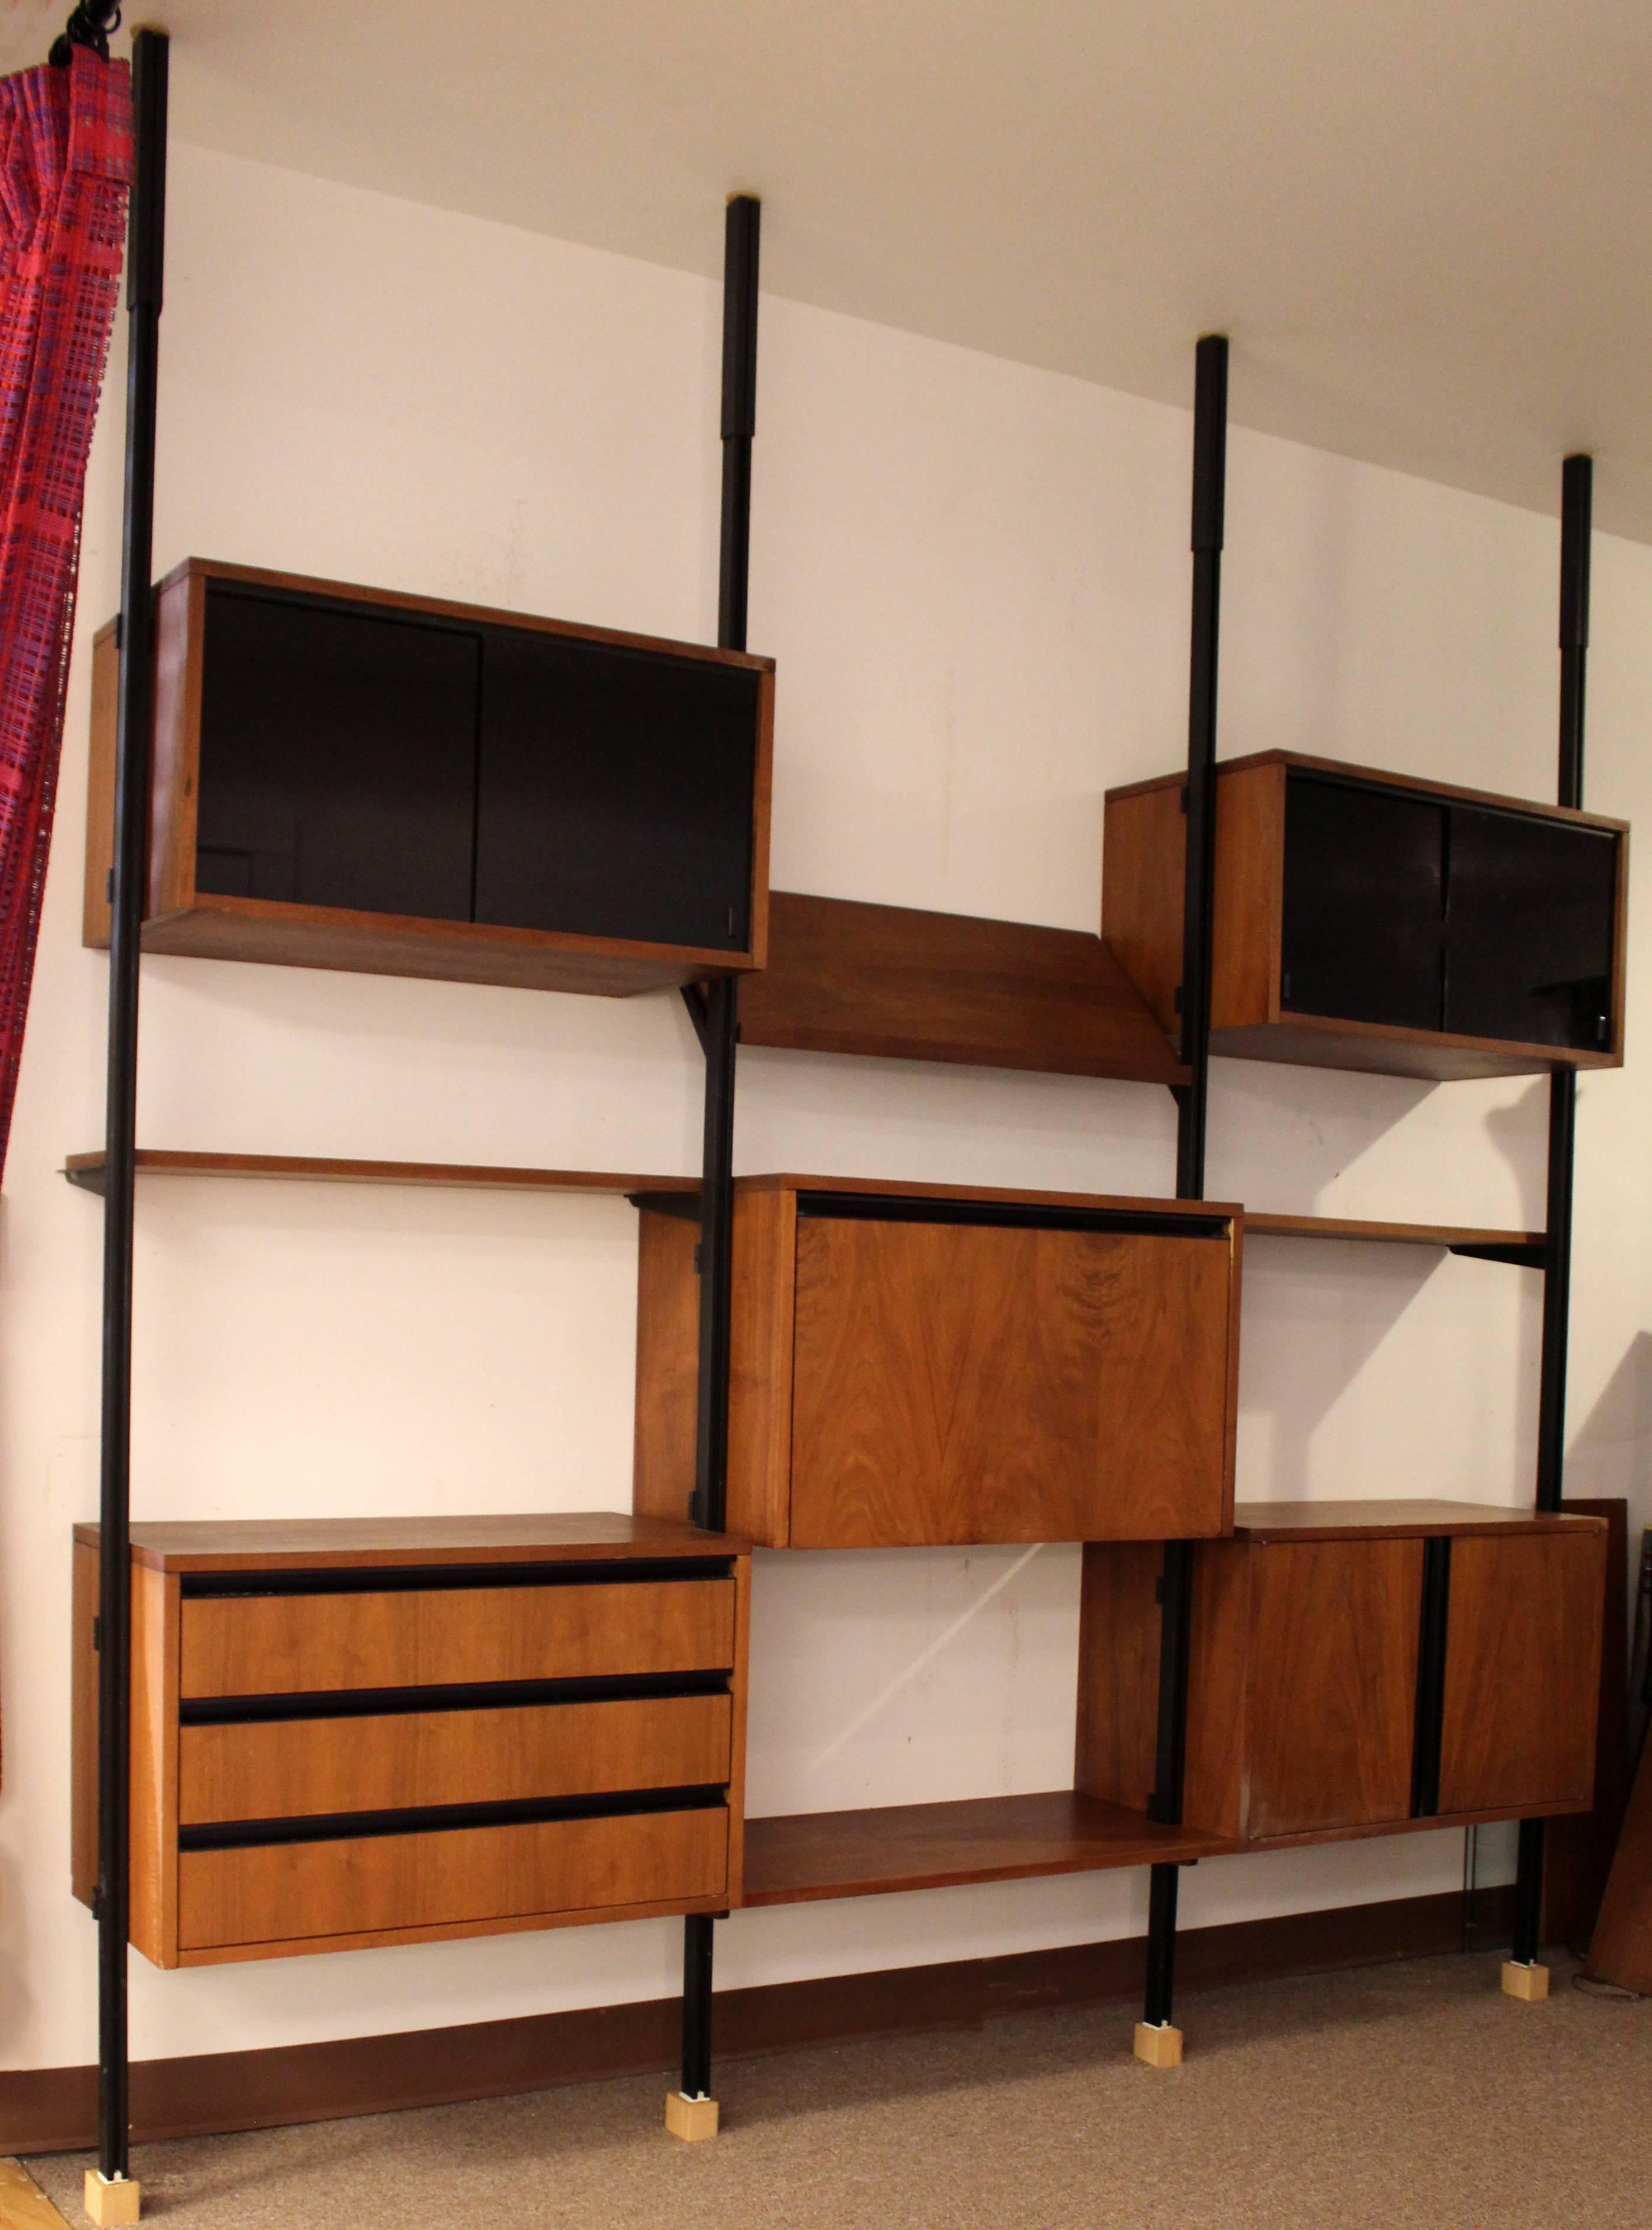 For your consideration is a wonderful, three bay, storage shelving wall unit by George Nelson, circa 1950s. In excellent condition. The dimensions are 91